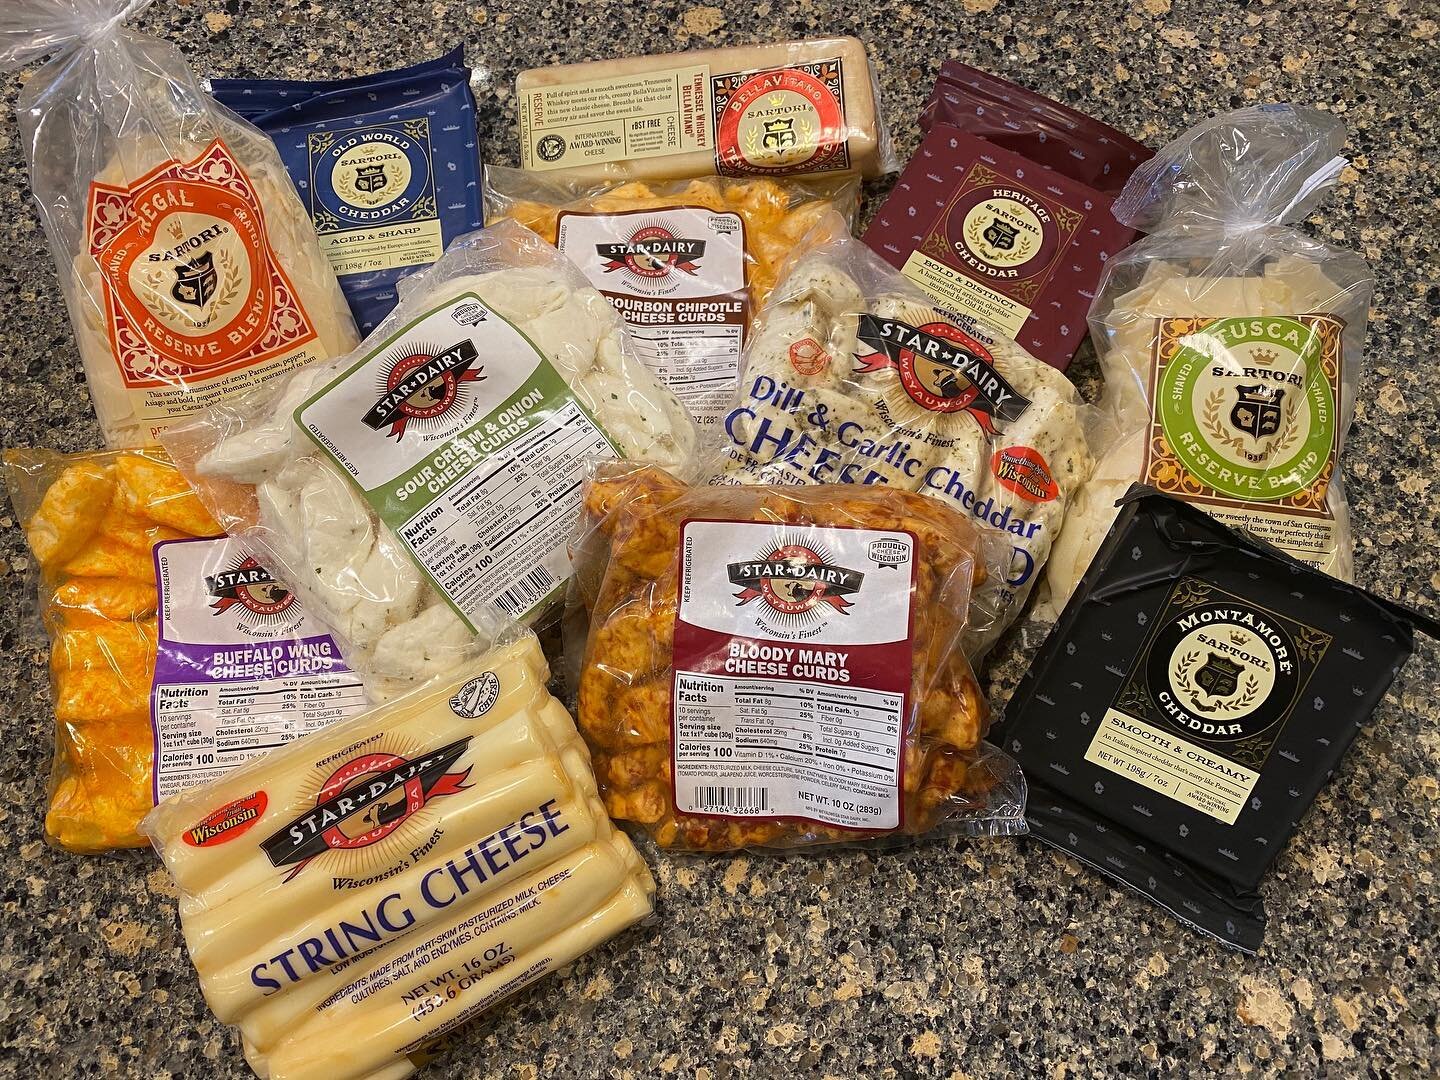 It&rsquo;s getting a little cheezy around here! Check out our selection of cheeses online and order for curbside pickup! 🧀  #remixdelights #cheese #cheezy #cheesecurds #smallbusiness #supportfarmers #supportlocal #stpaulmn